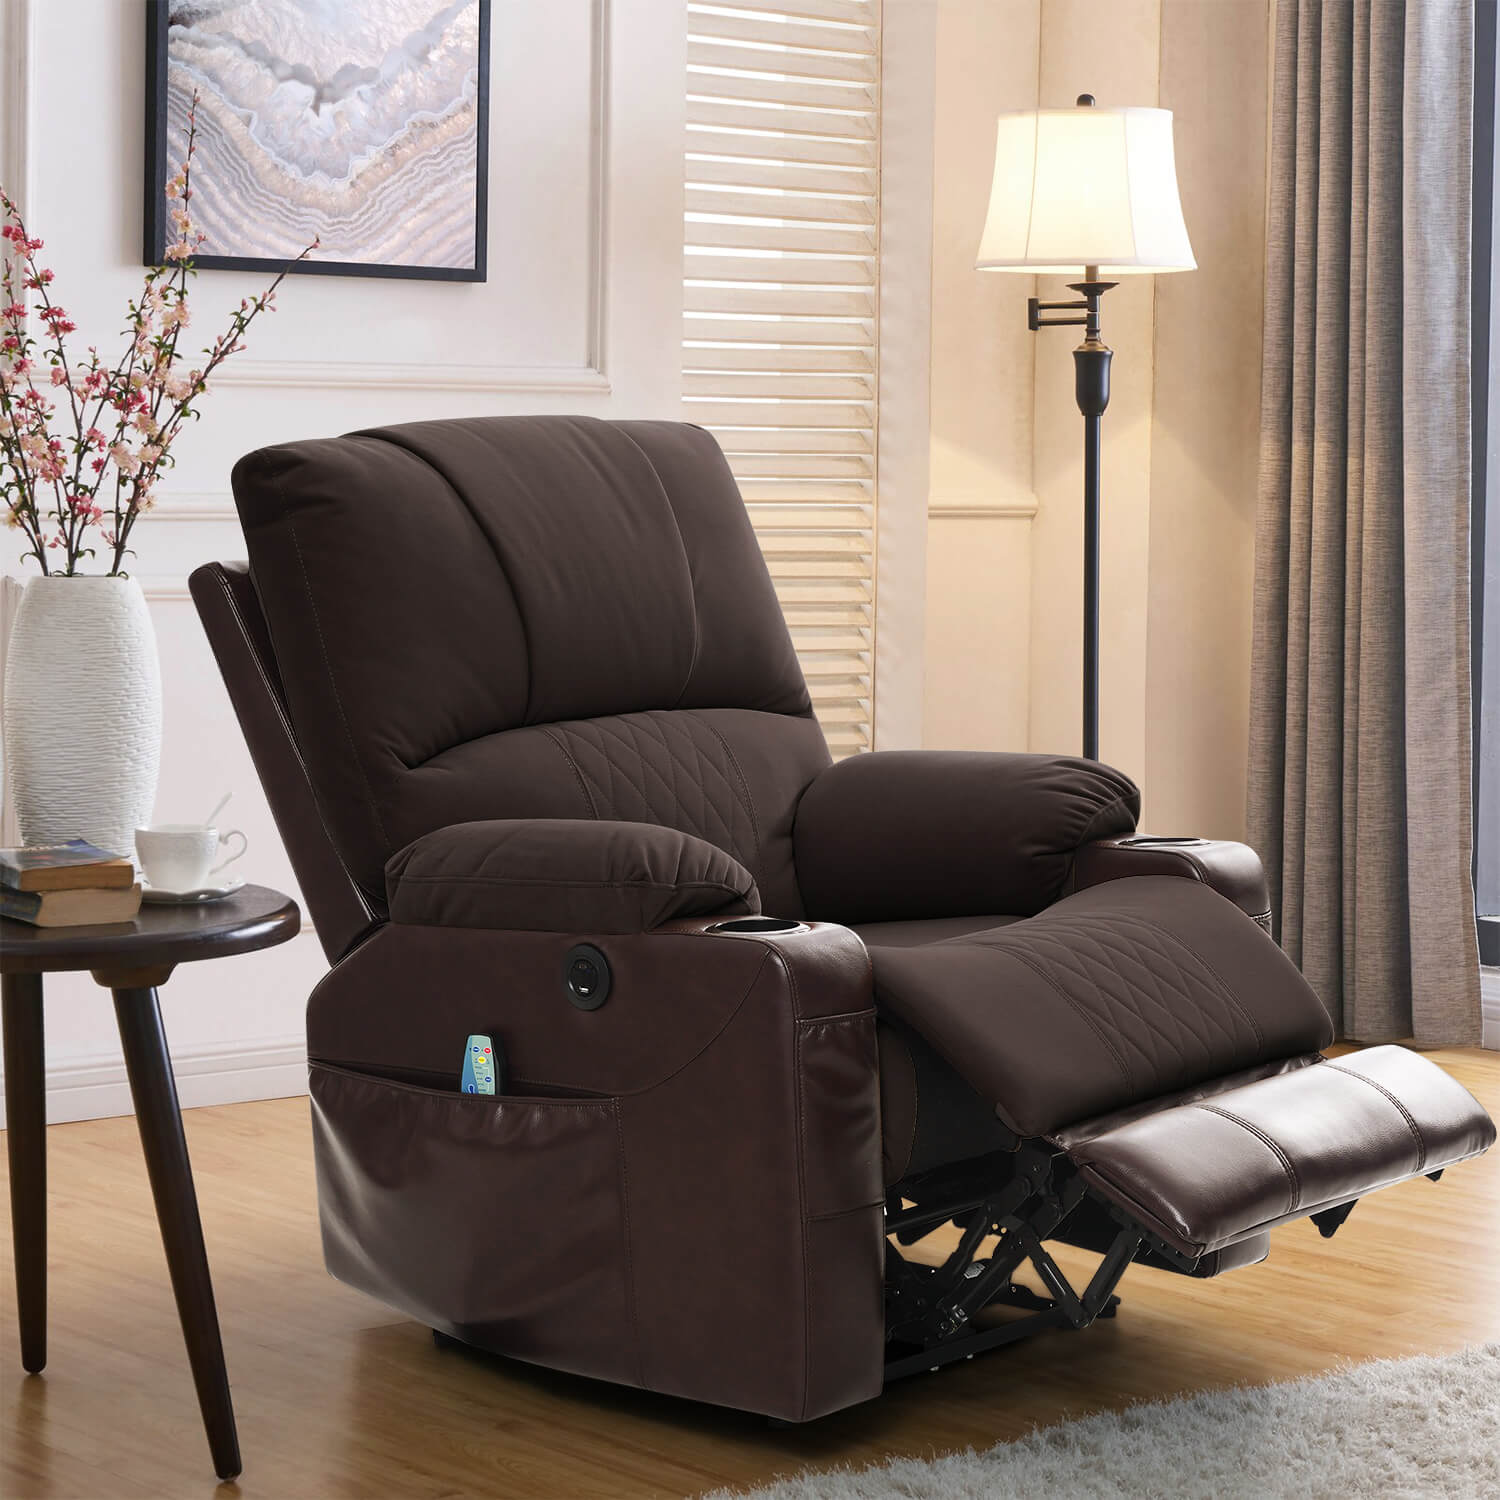 Power Recliner Chair with Heat and Massage, Wall Hugger, Fabric Brown